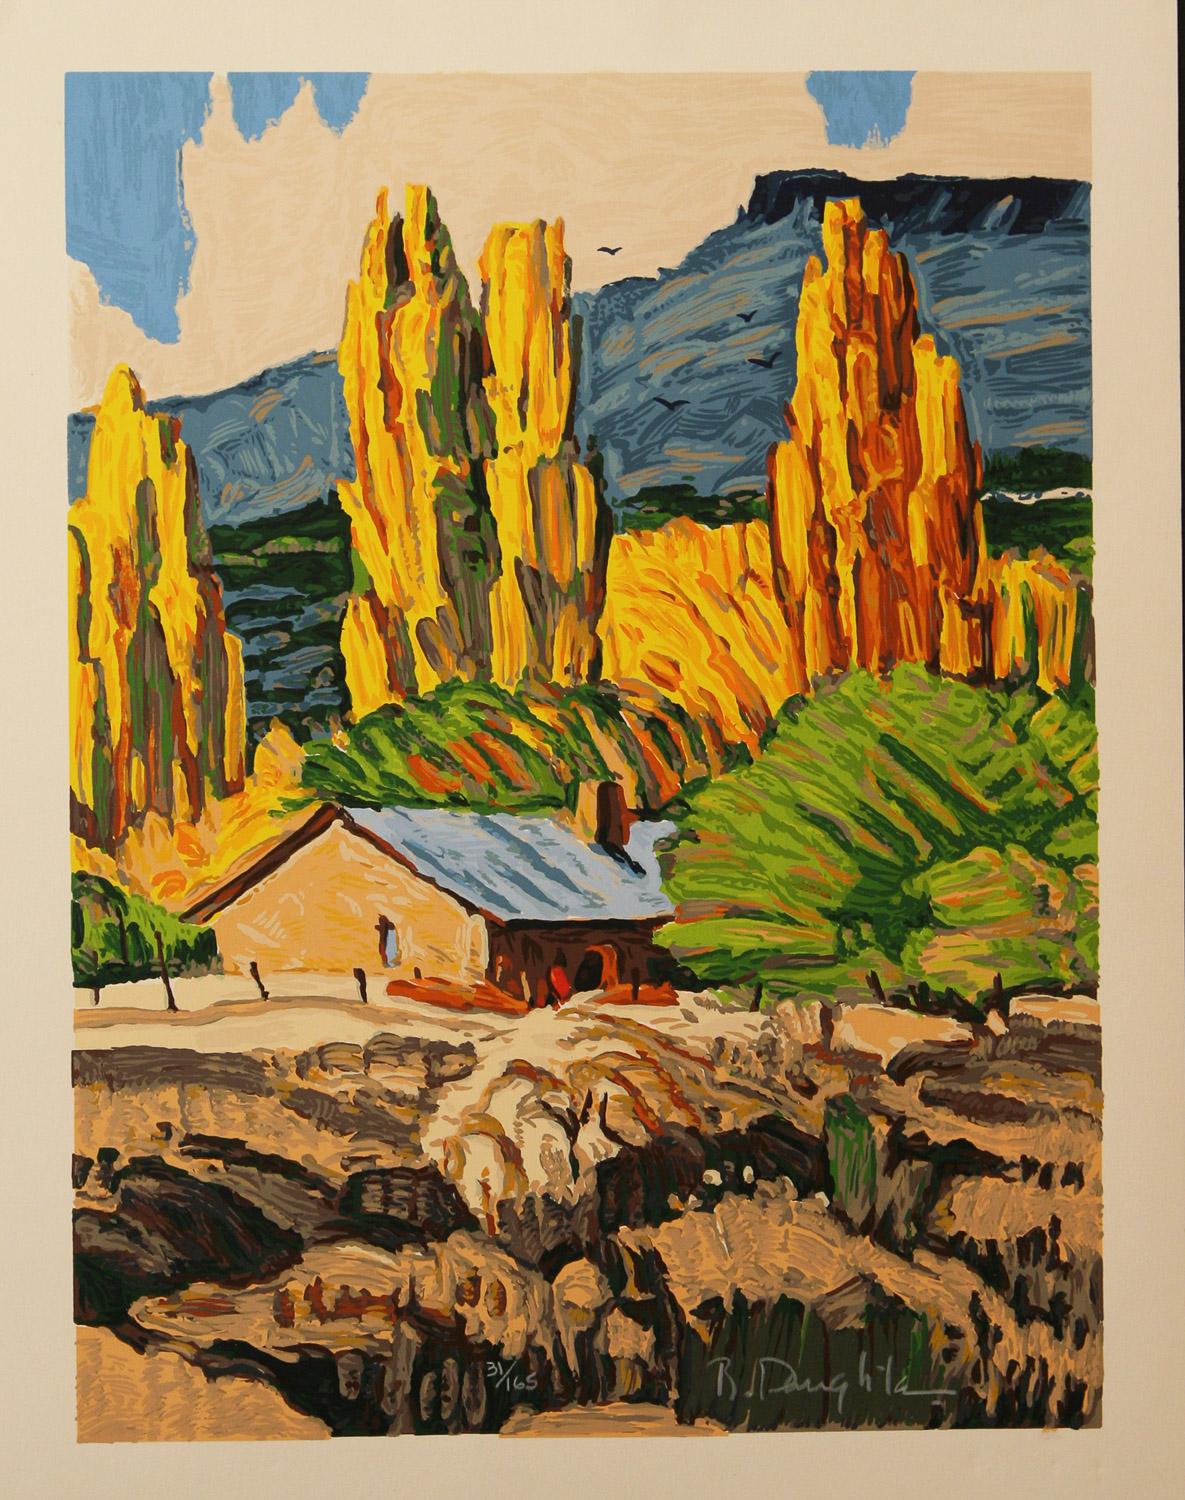 Ranchito hand-pulled serigraph by Robert Daughters